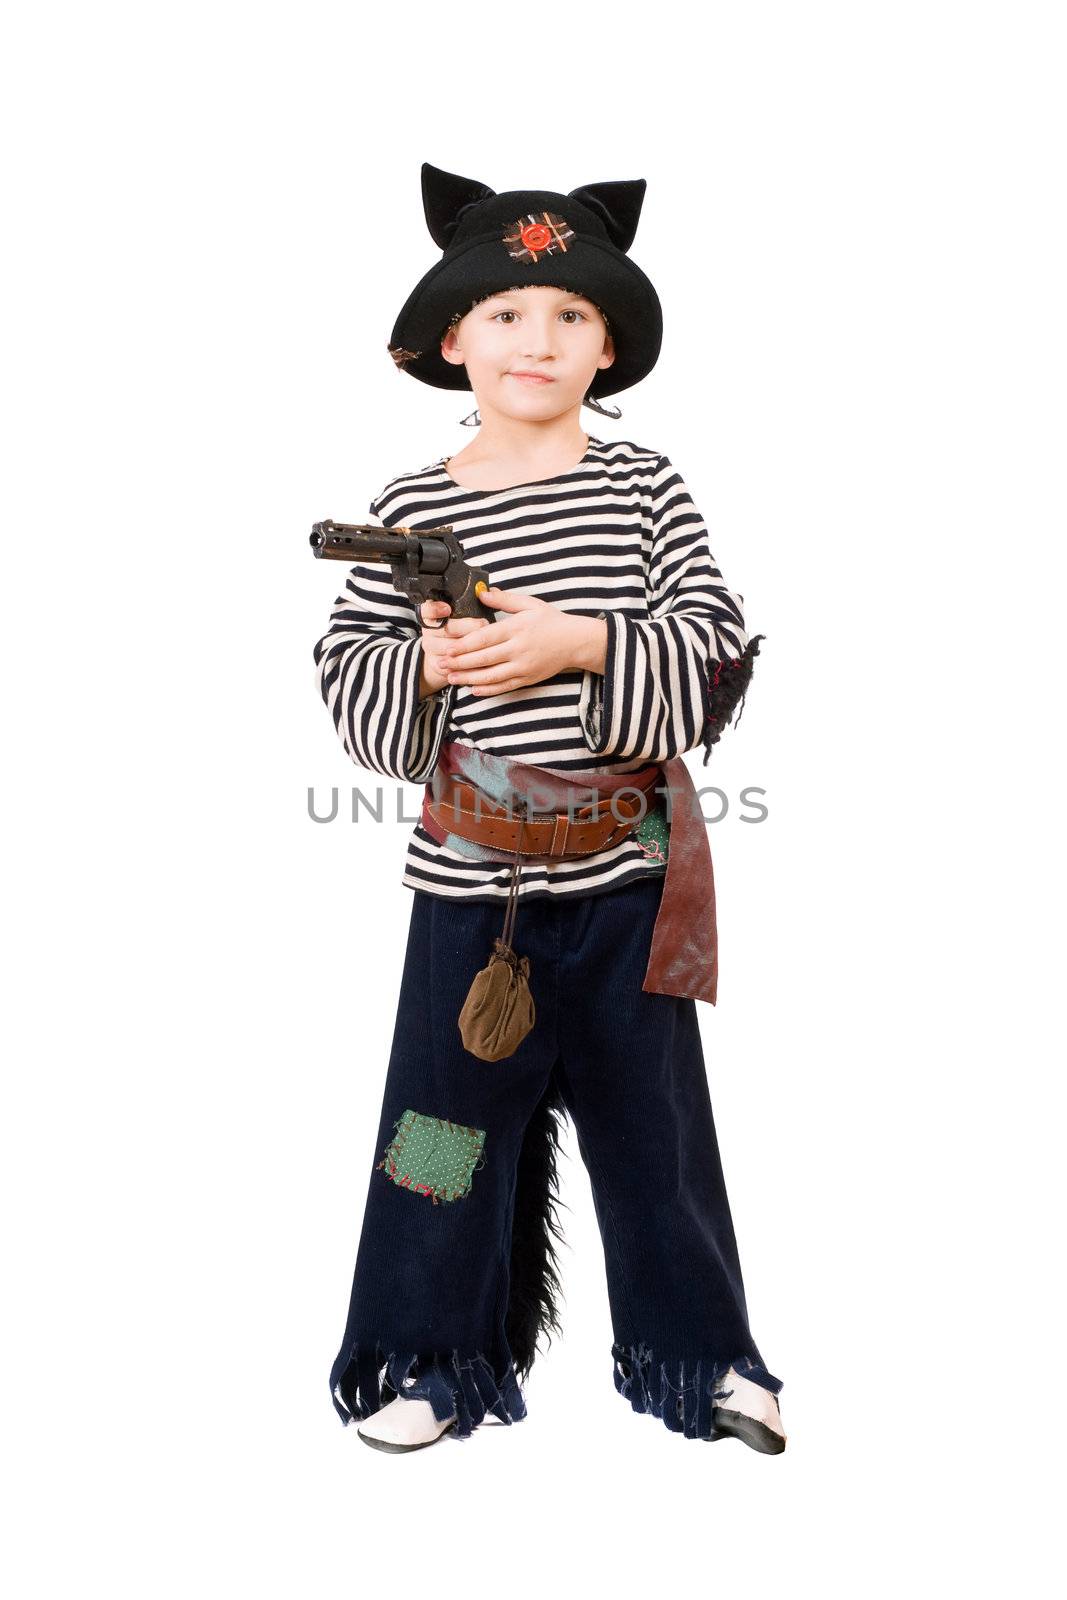 Boy with gun dressed as a pirate. Isolated